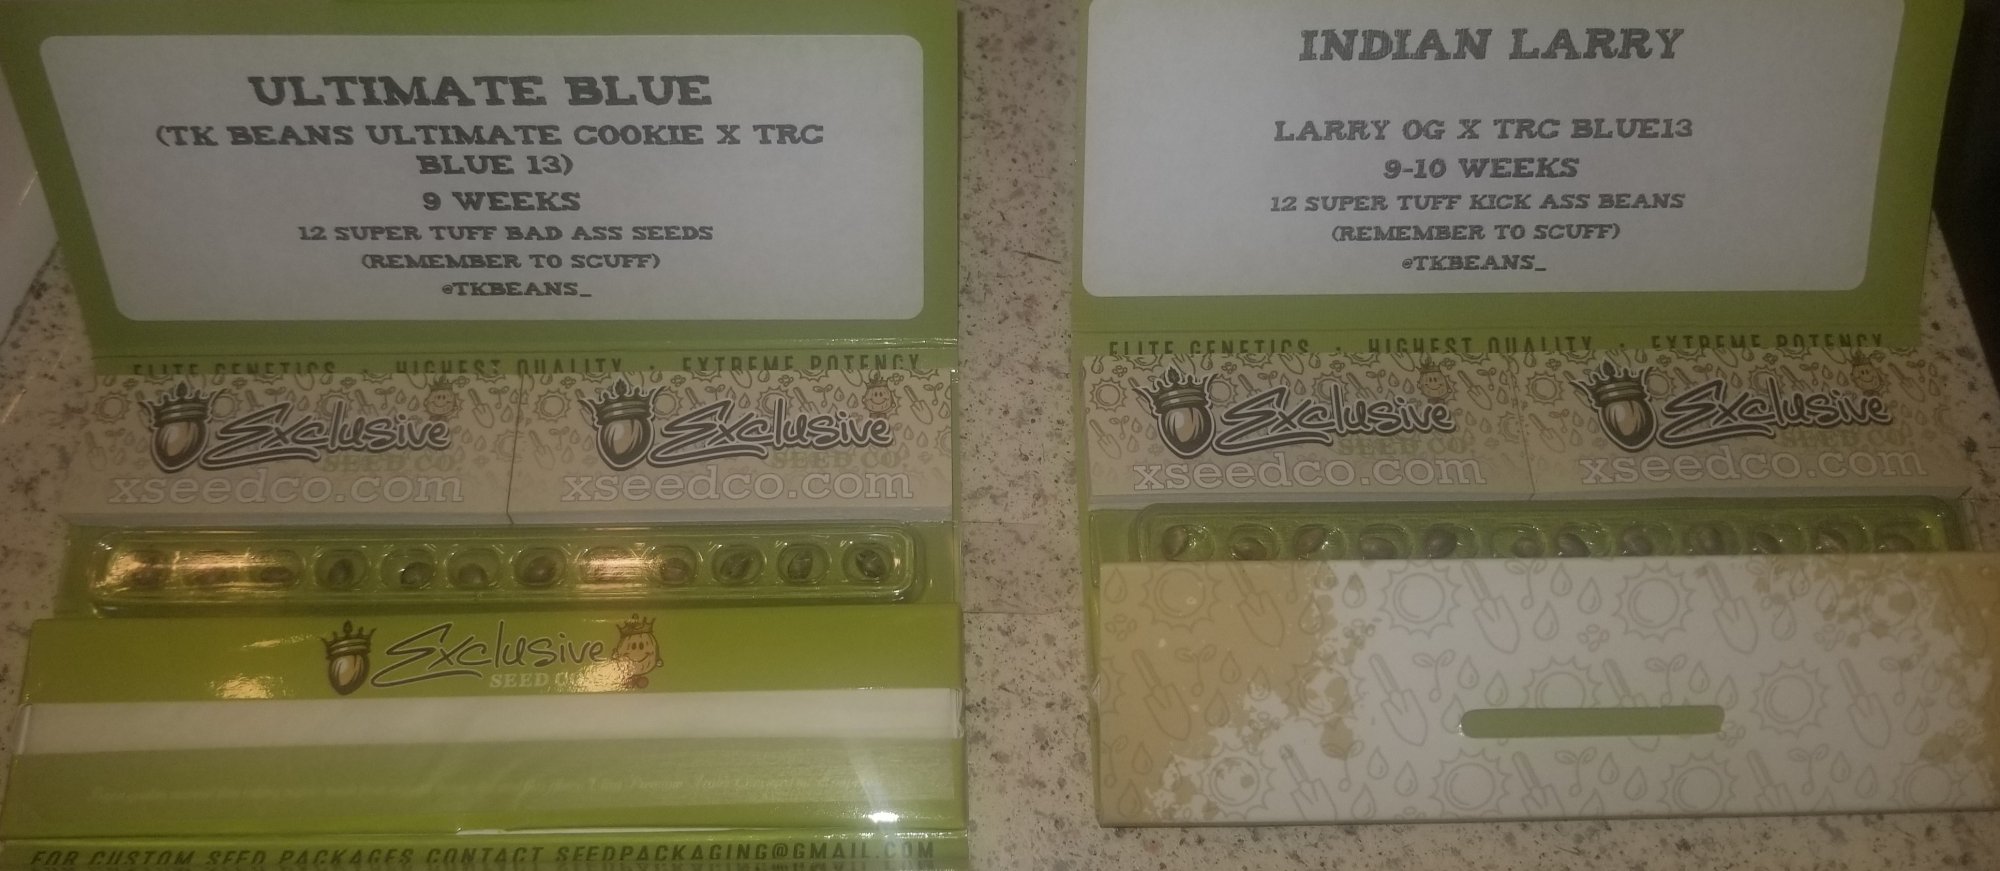 Tk beans indian larry and ultimate blue